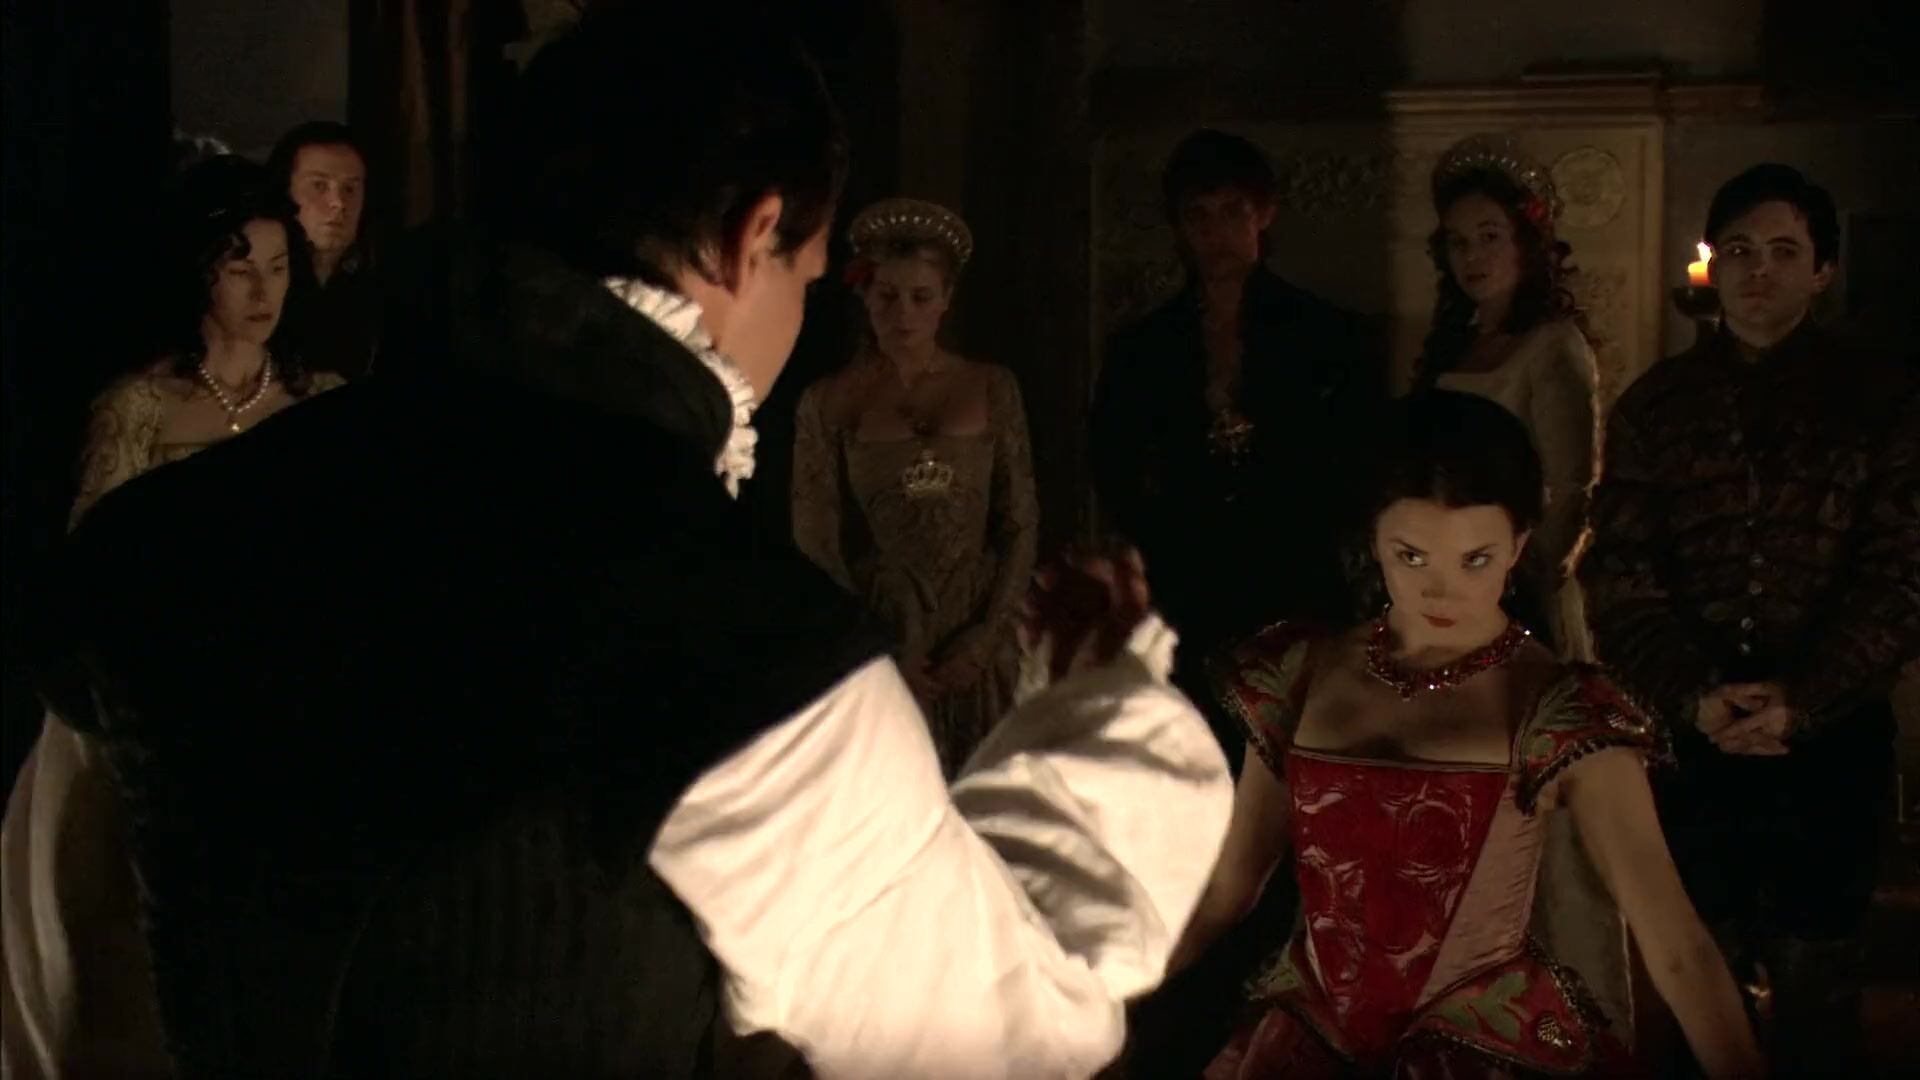 Cumfacial TV series The Tudors with participation of popular actress Natalie Dormer being fucked Hand - 1